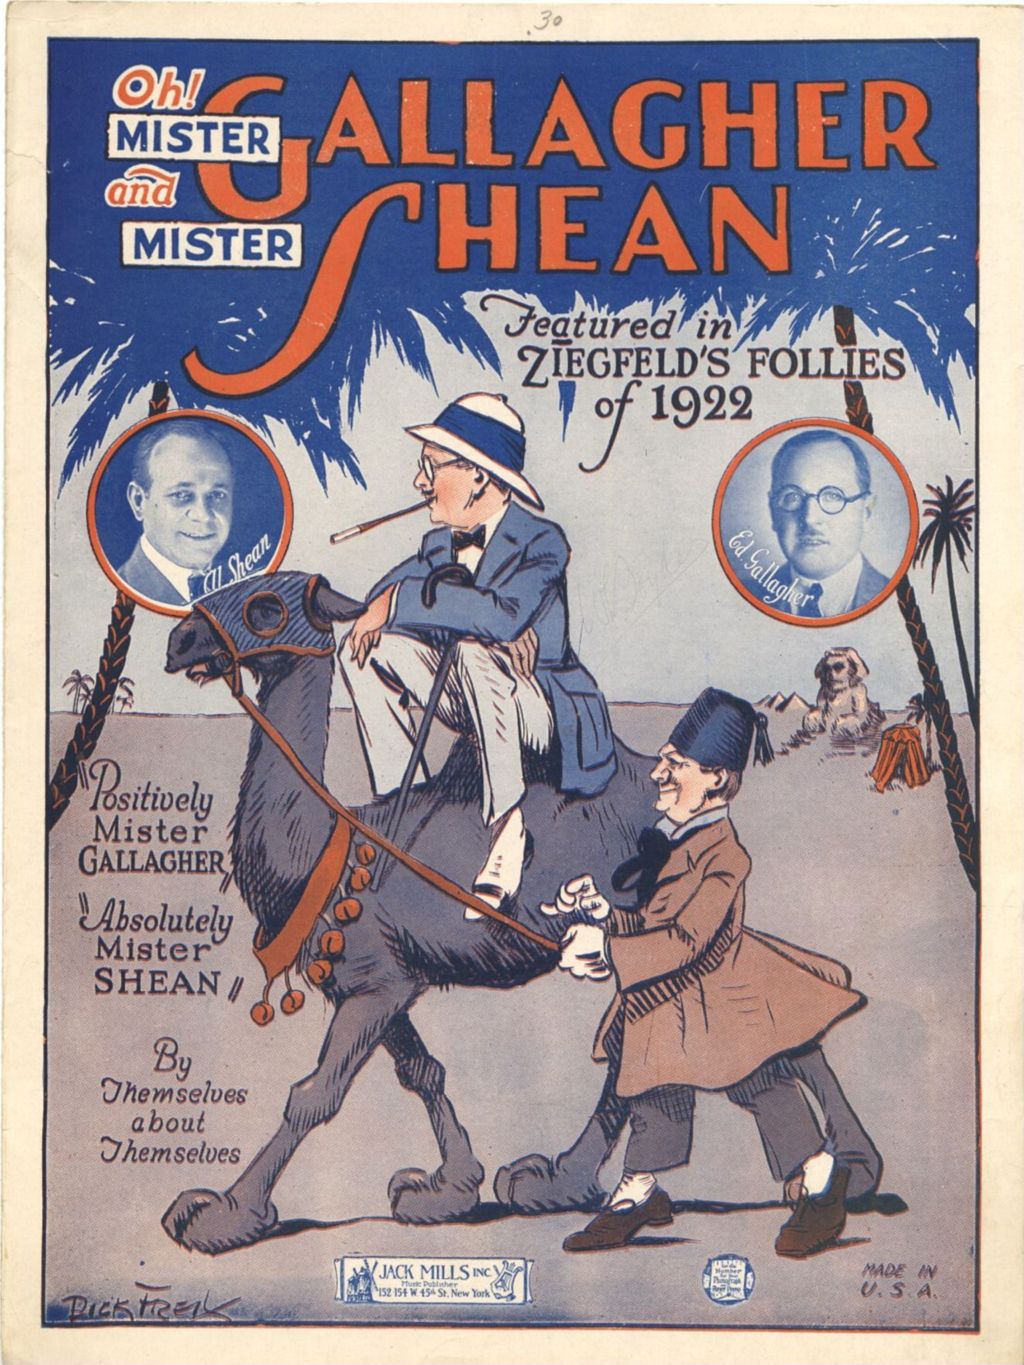 Miniature of Mister Gallagher and Mister Shean